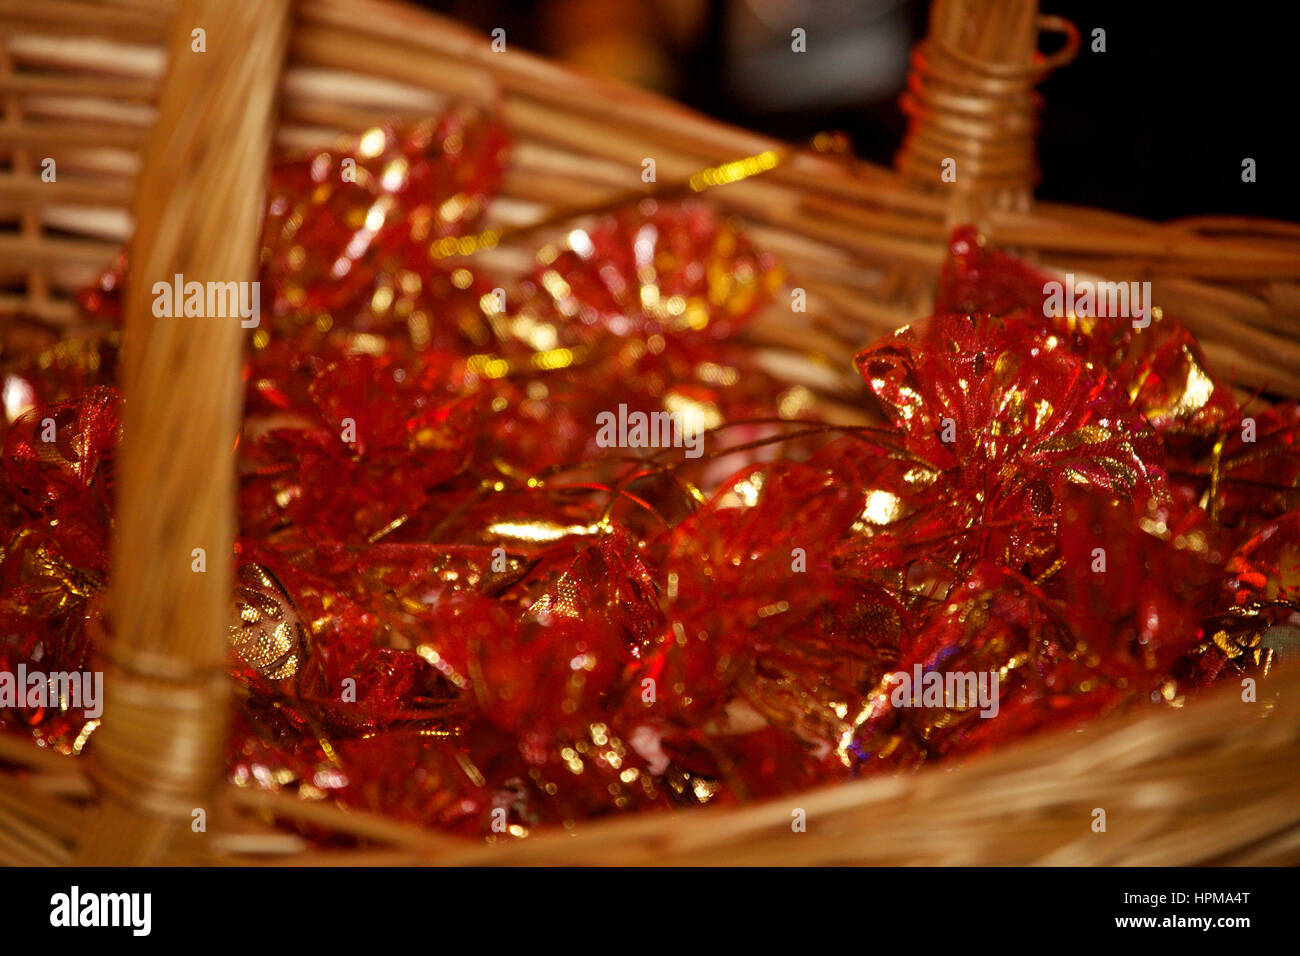 Red gift bags with gold ties in wicker basket Stock Photo